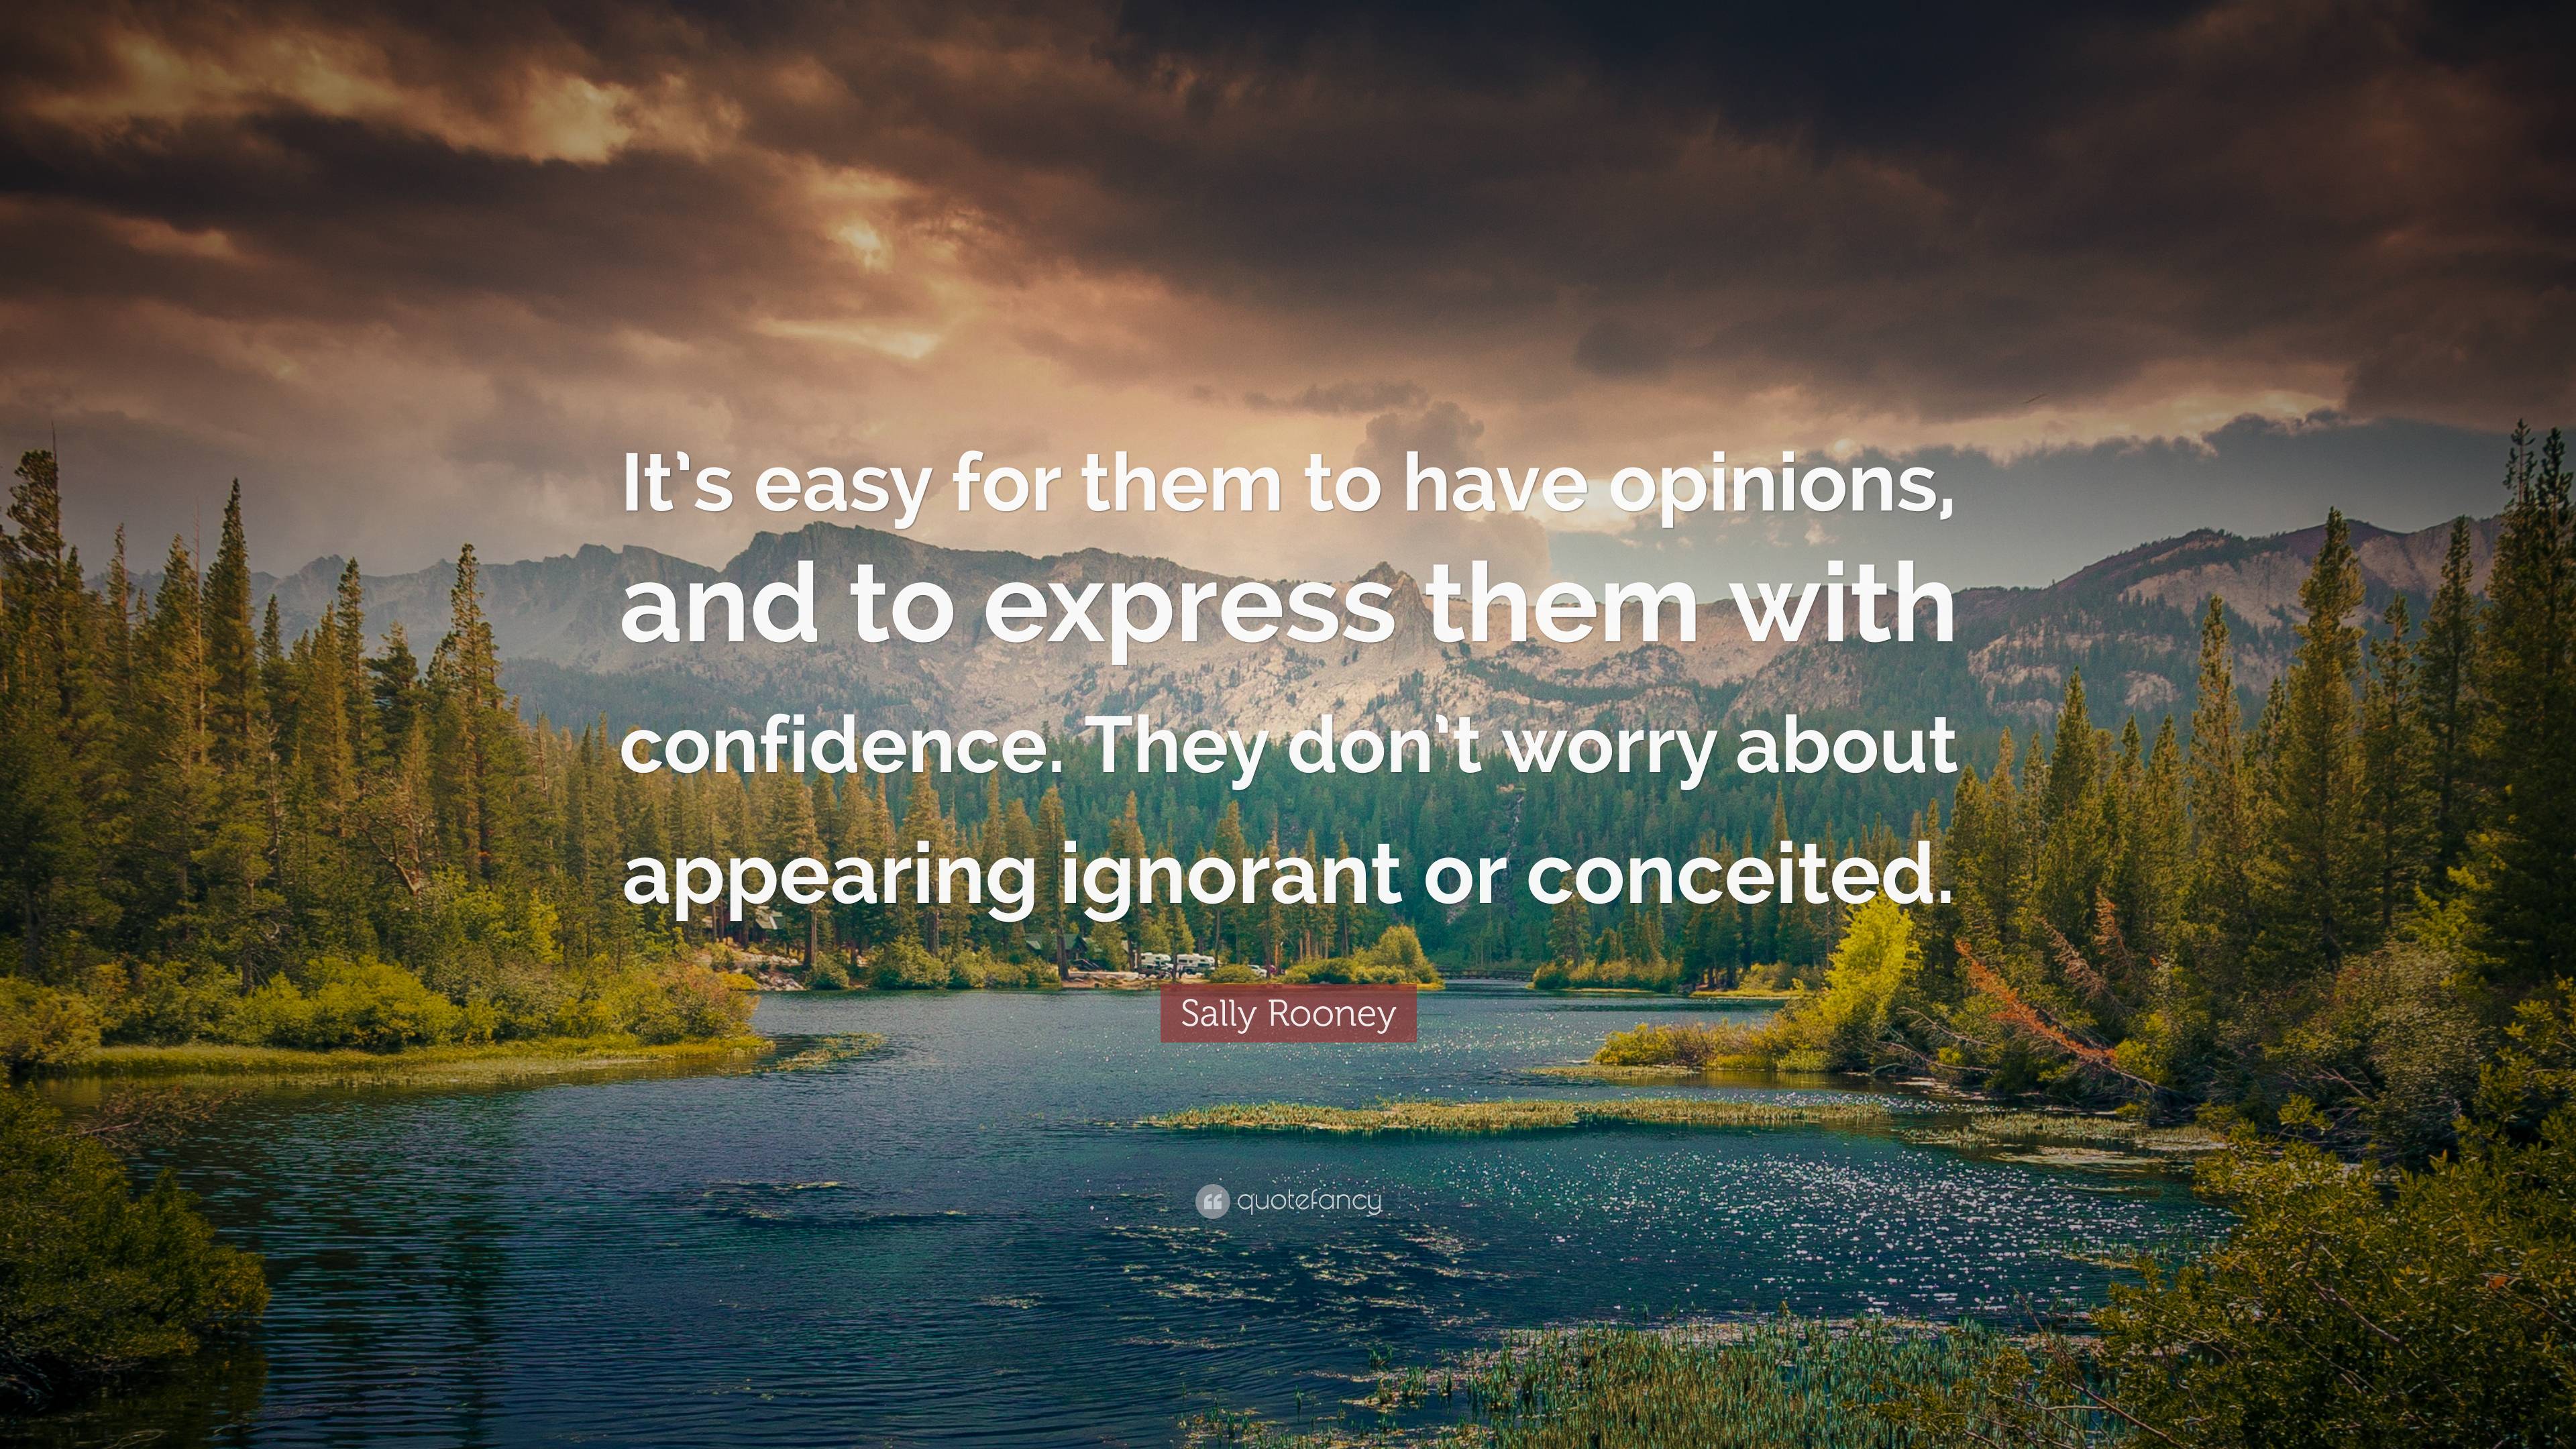 Sally Rooney Quote: “It’s easy for them to have opinions, and to ...